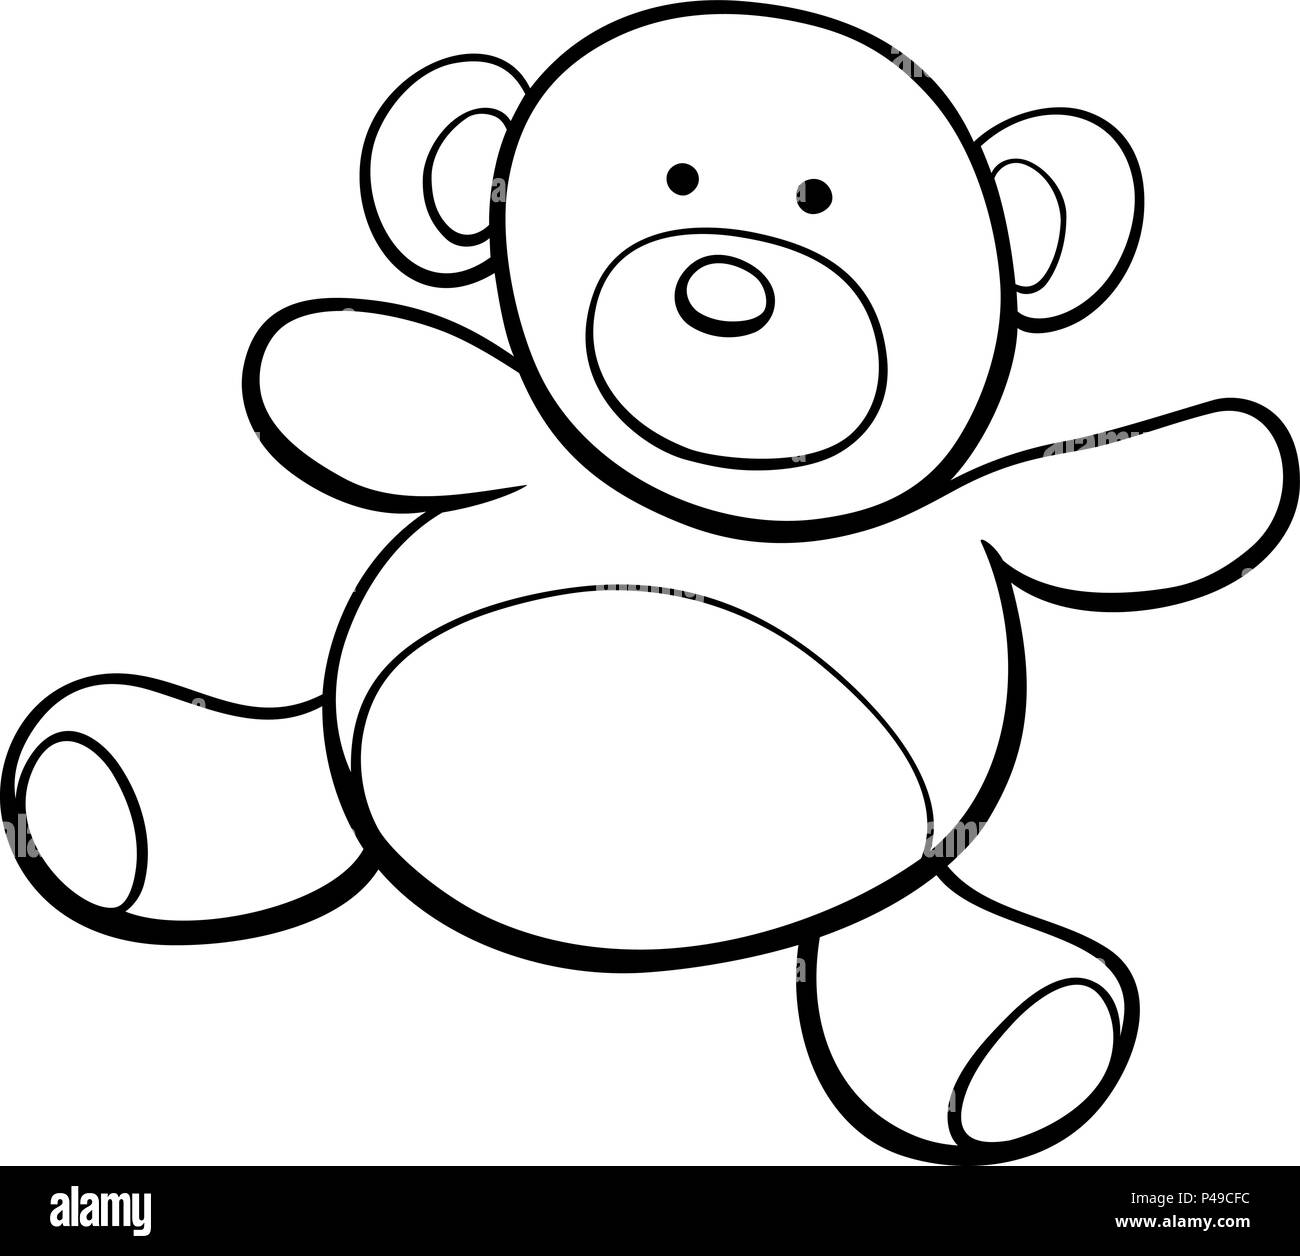 Black and White Cartoon Illustration of Teddy Bear Toy Clip Art Coloring Book Stock Vector